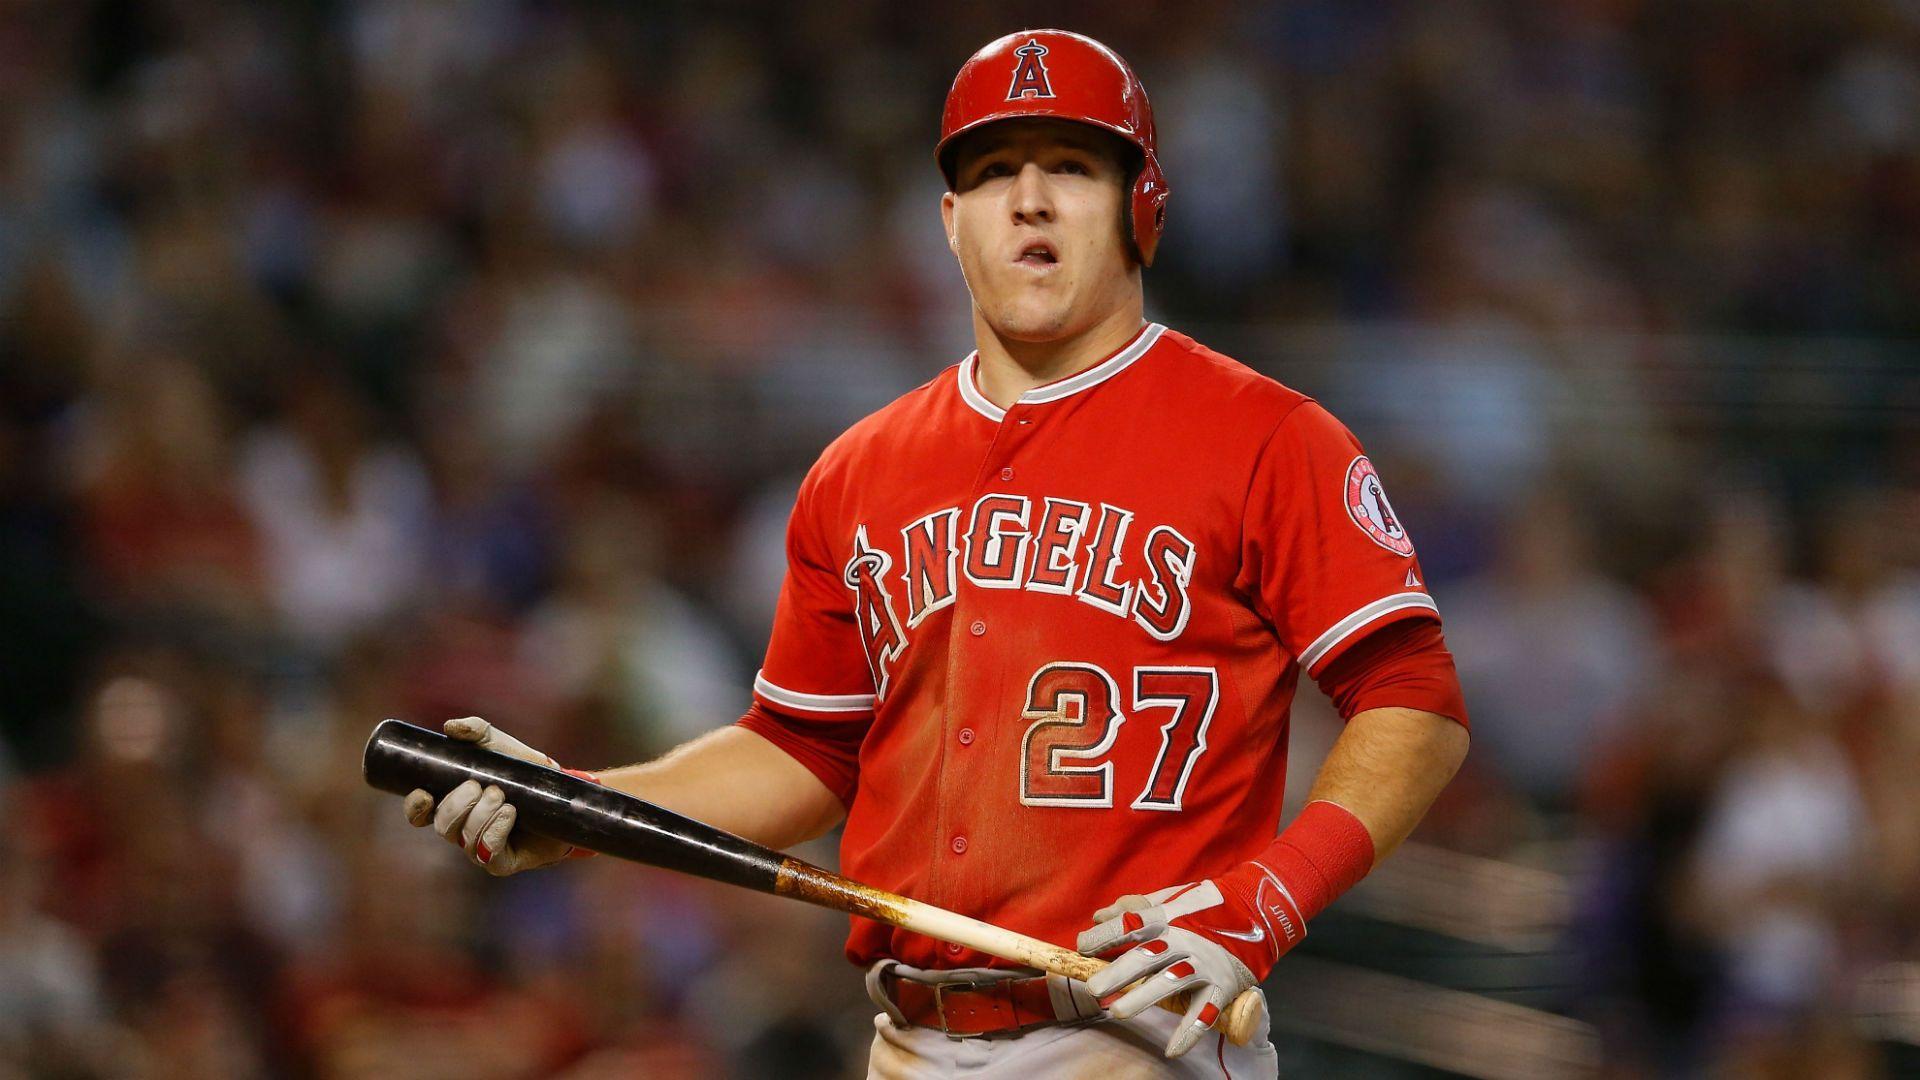 Angels' OF Mike Trout Out With UCL Tear In Left Thumb